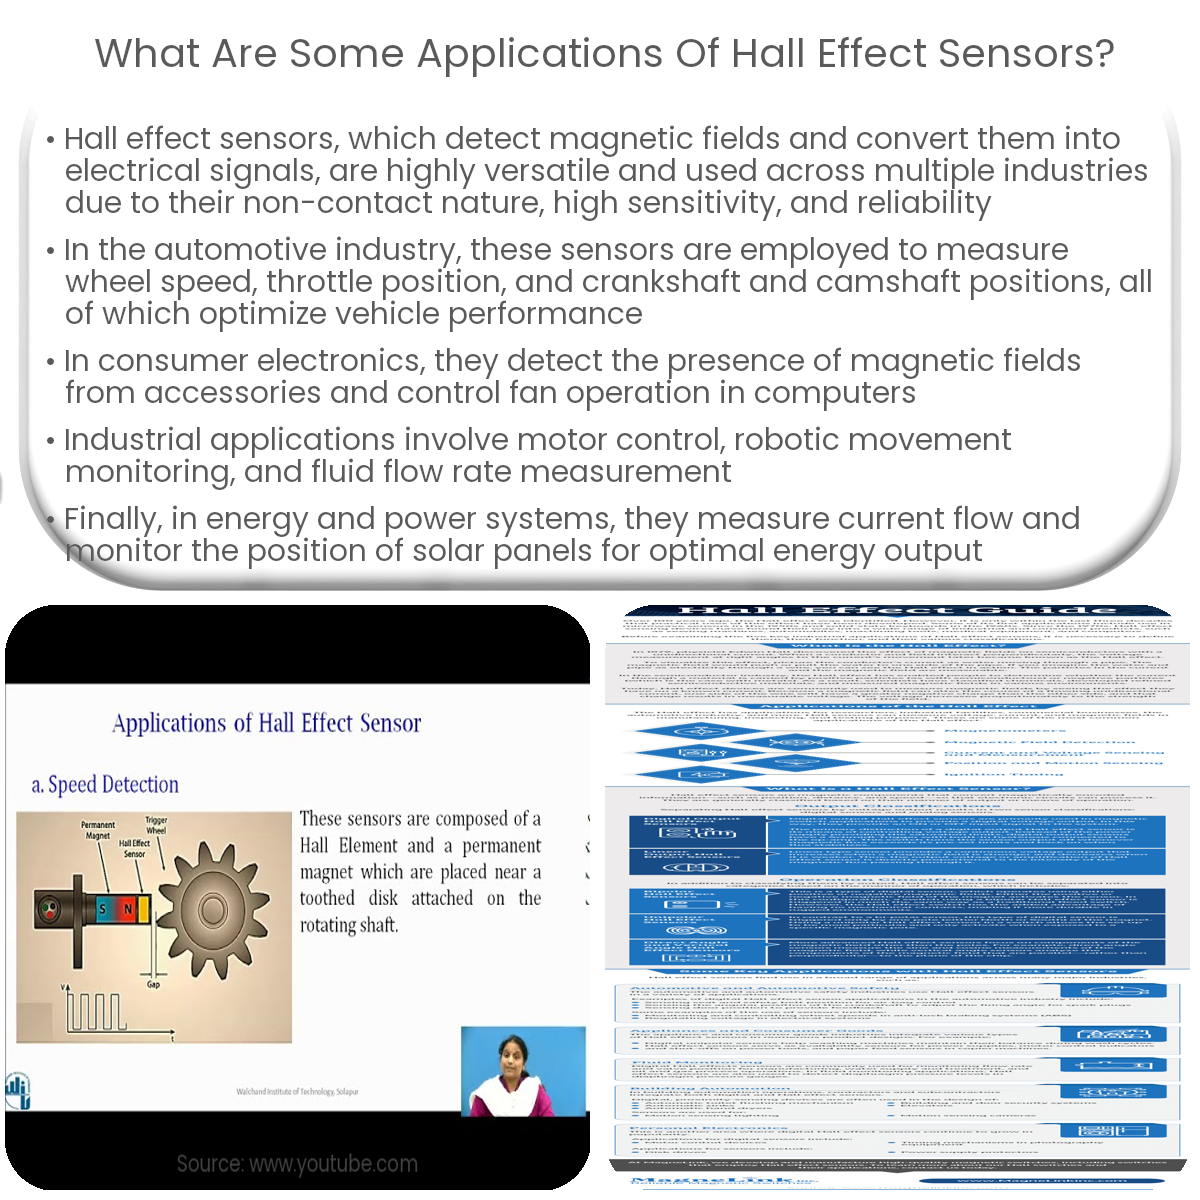 What are some applications of Hall effect sensors?